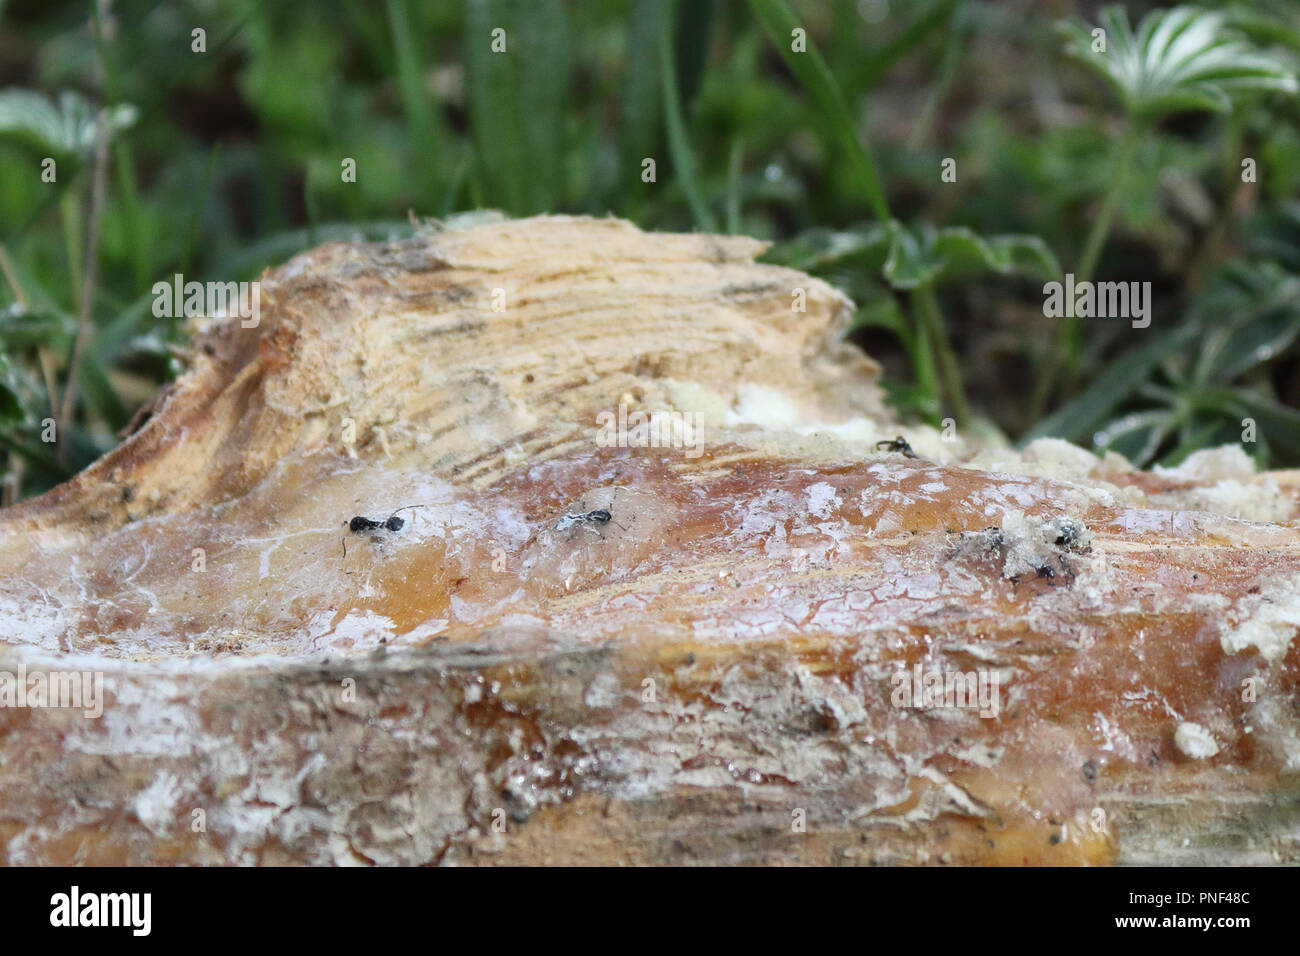 Some dead ants immersed and trapped in a pinewood resin on the grass Stock Photo